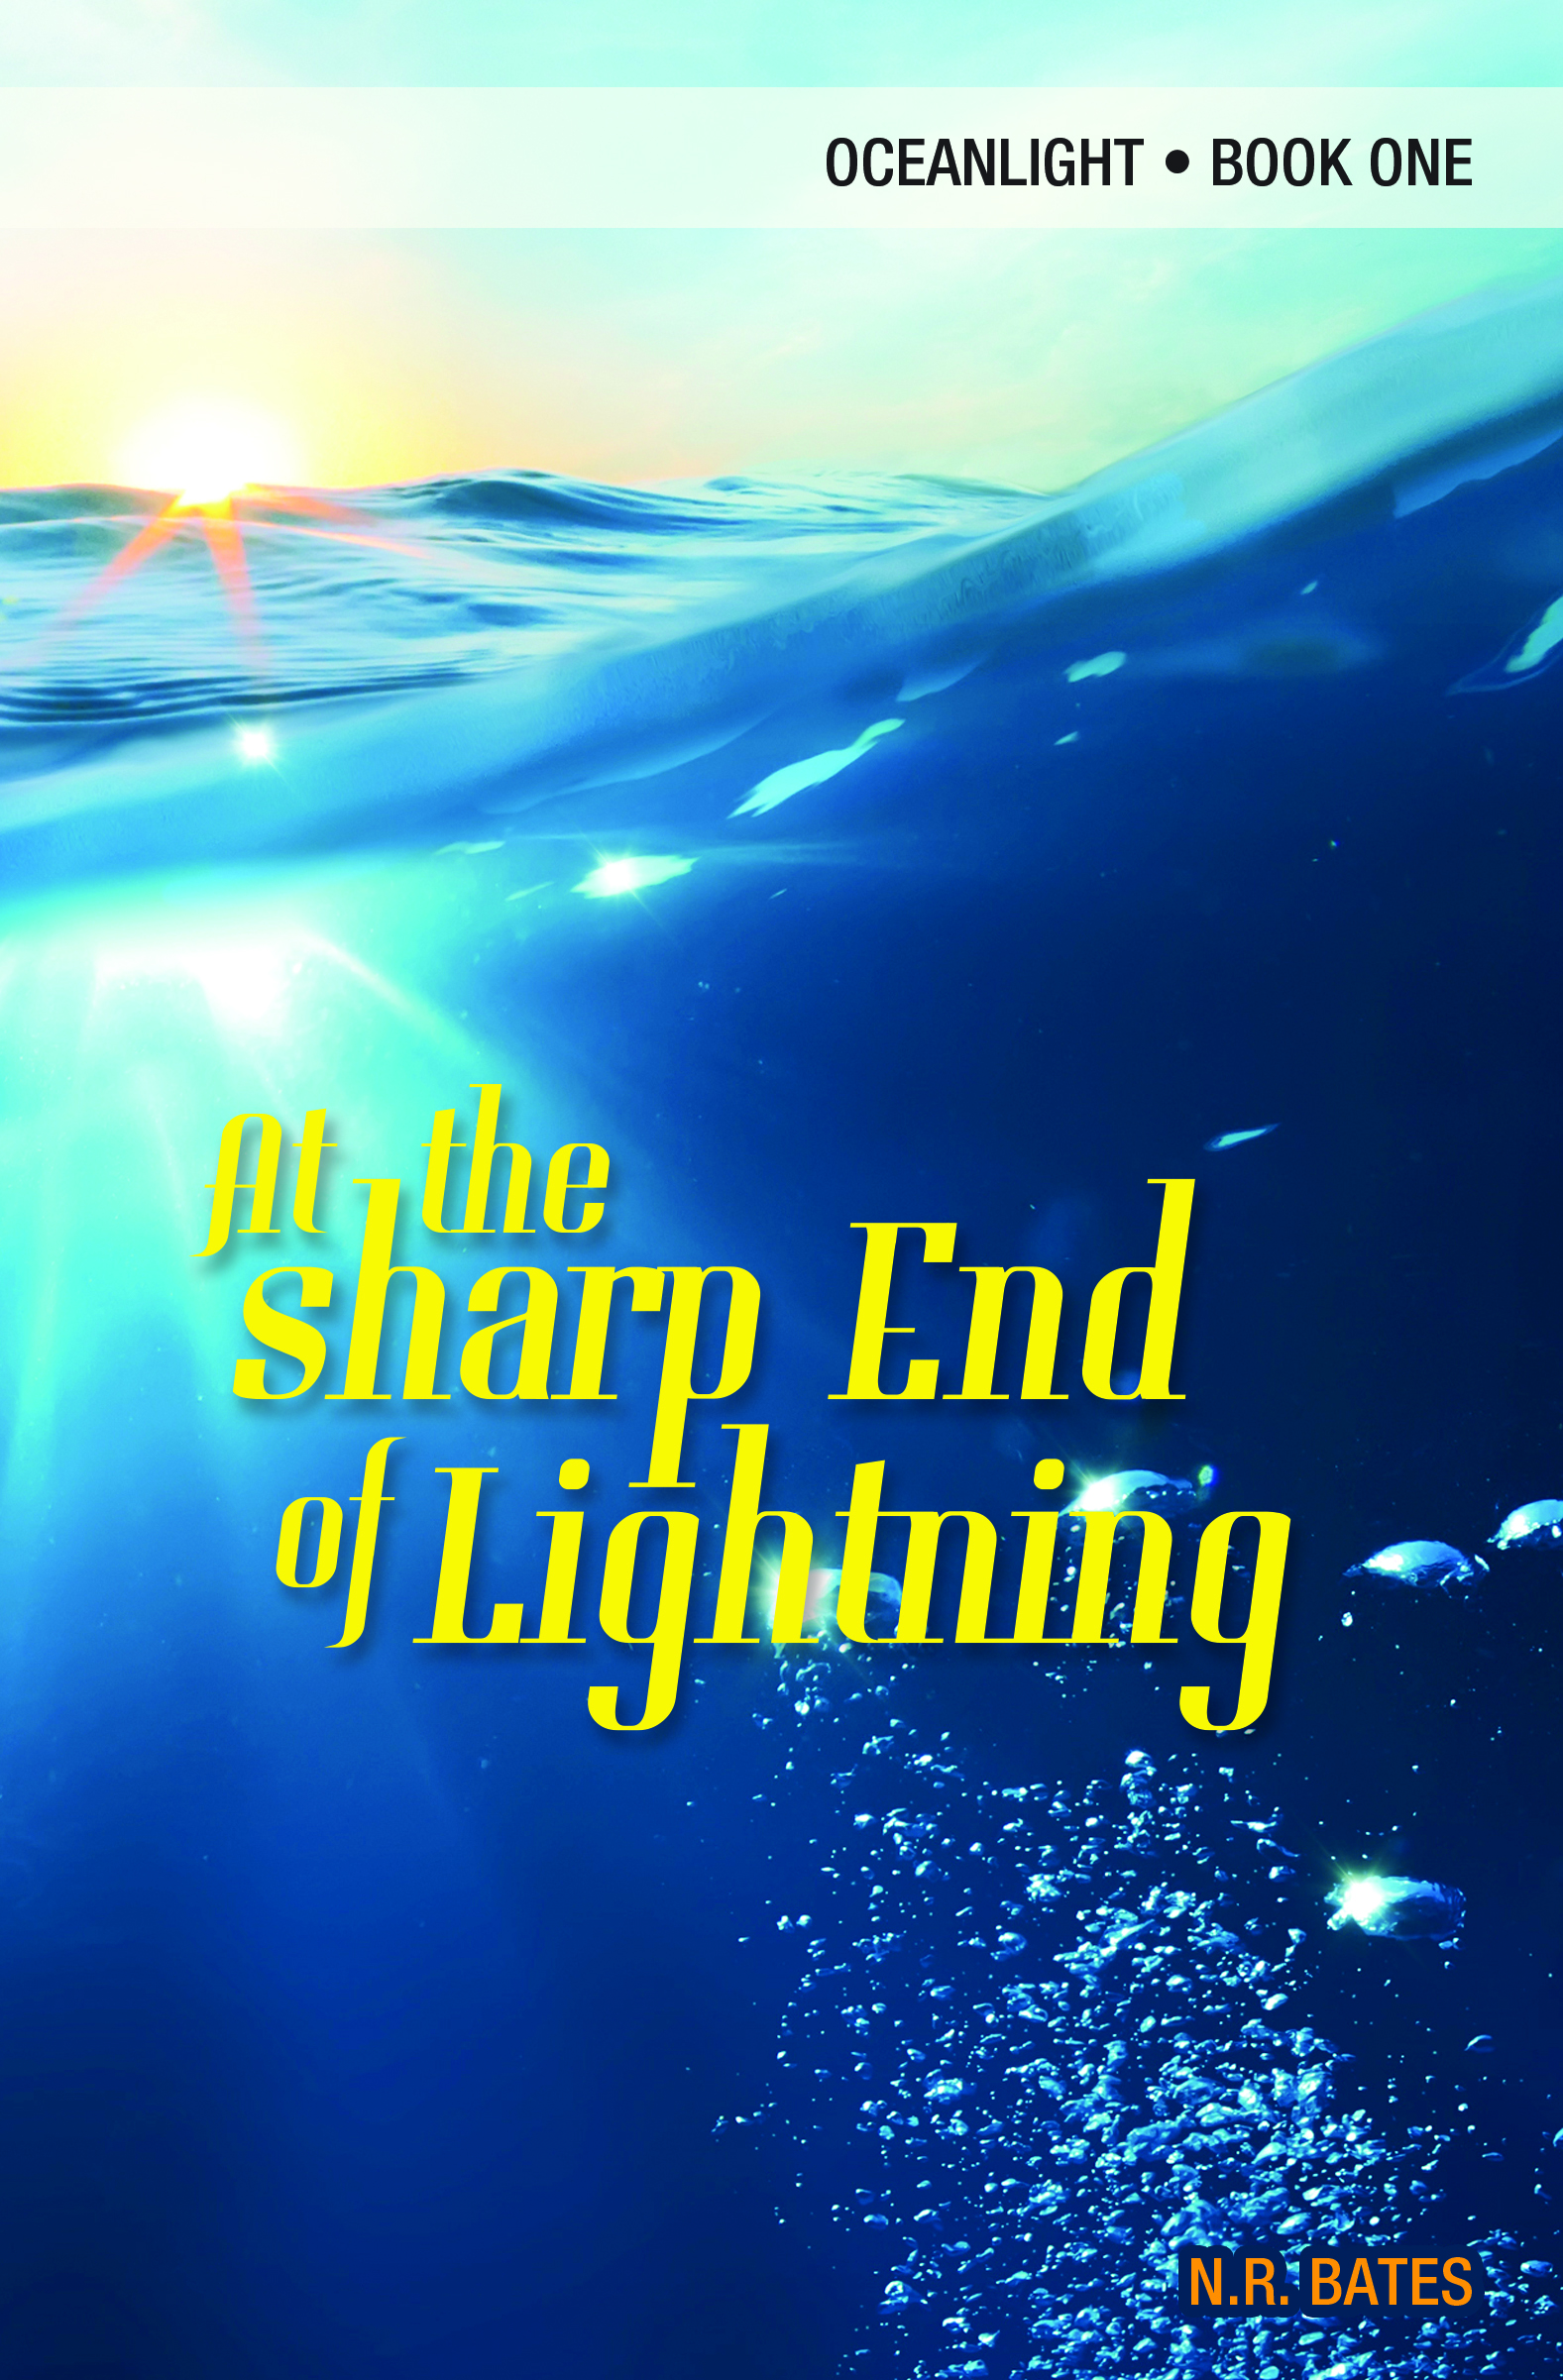 At The Sharp End of Lightning